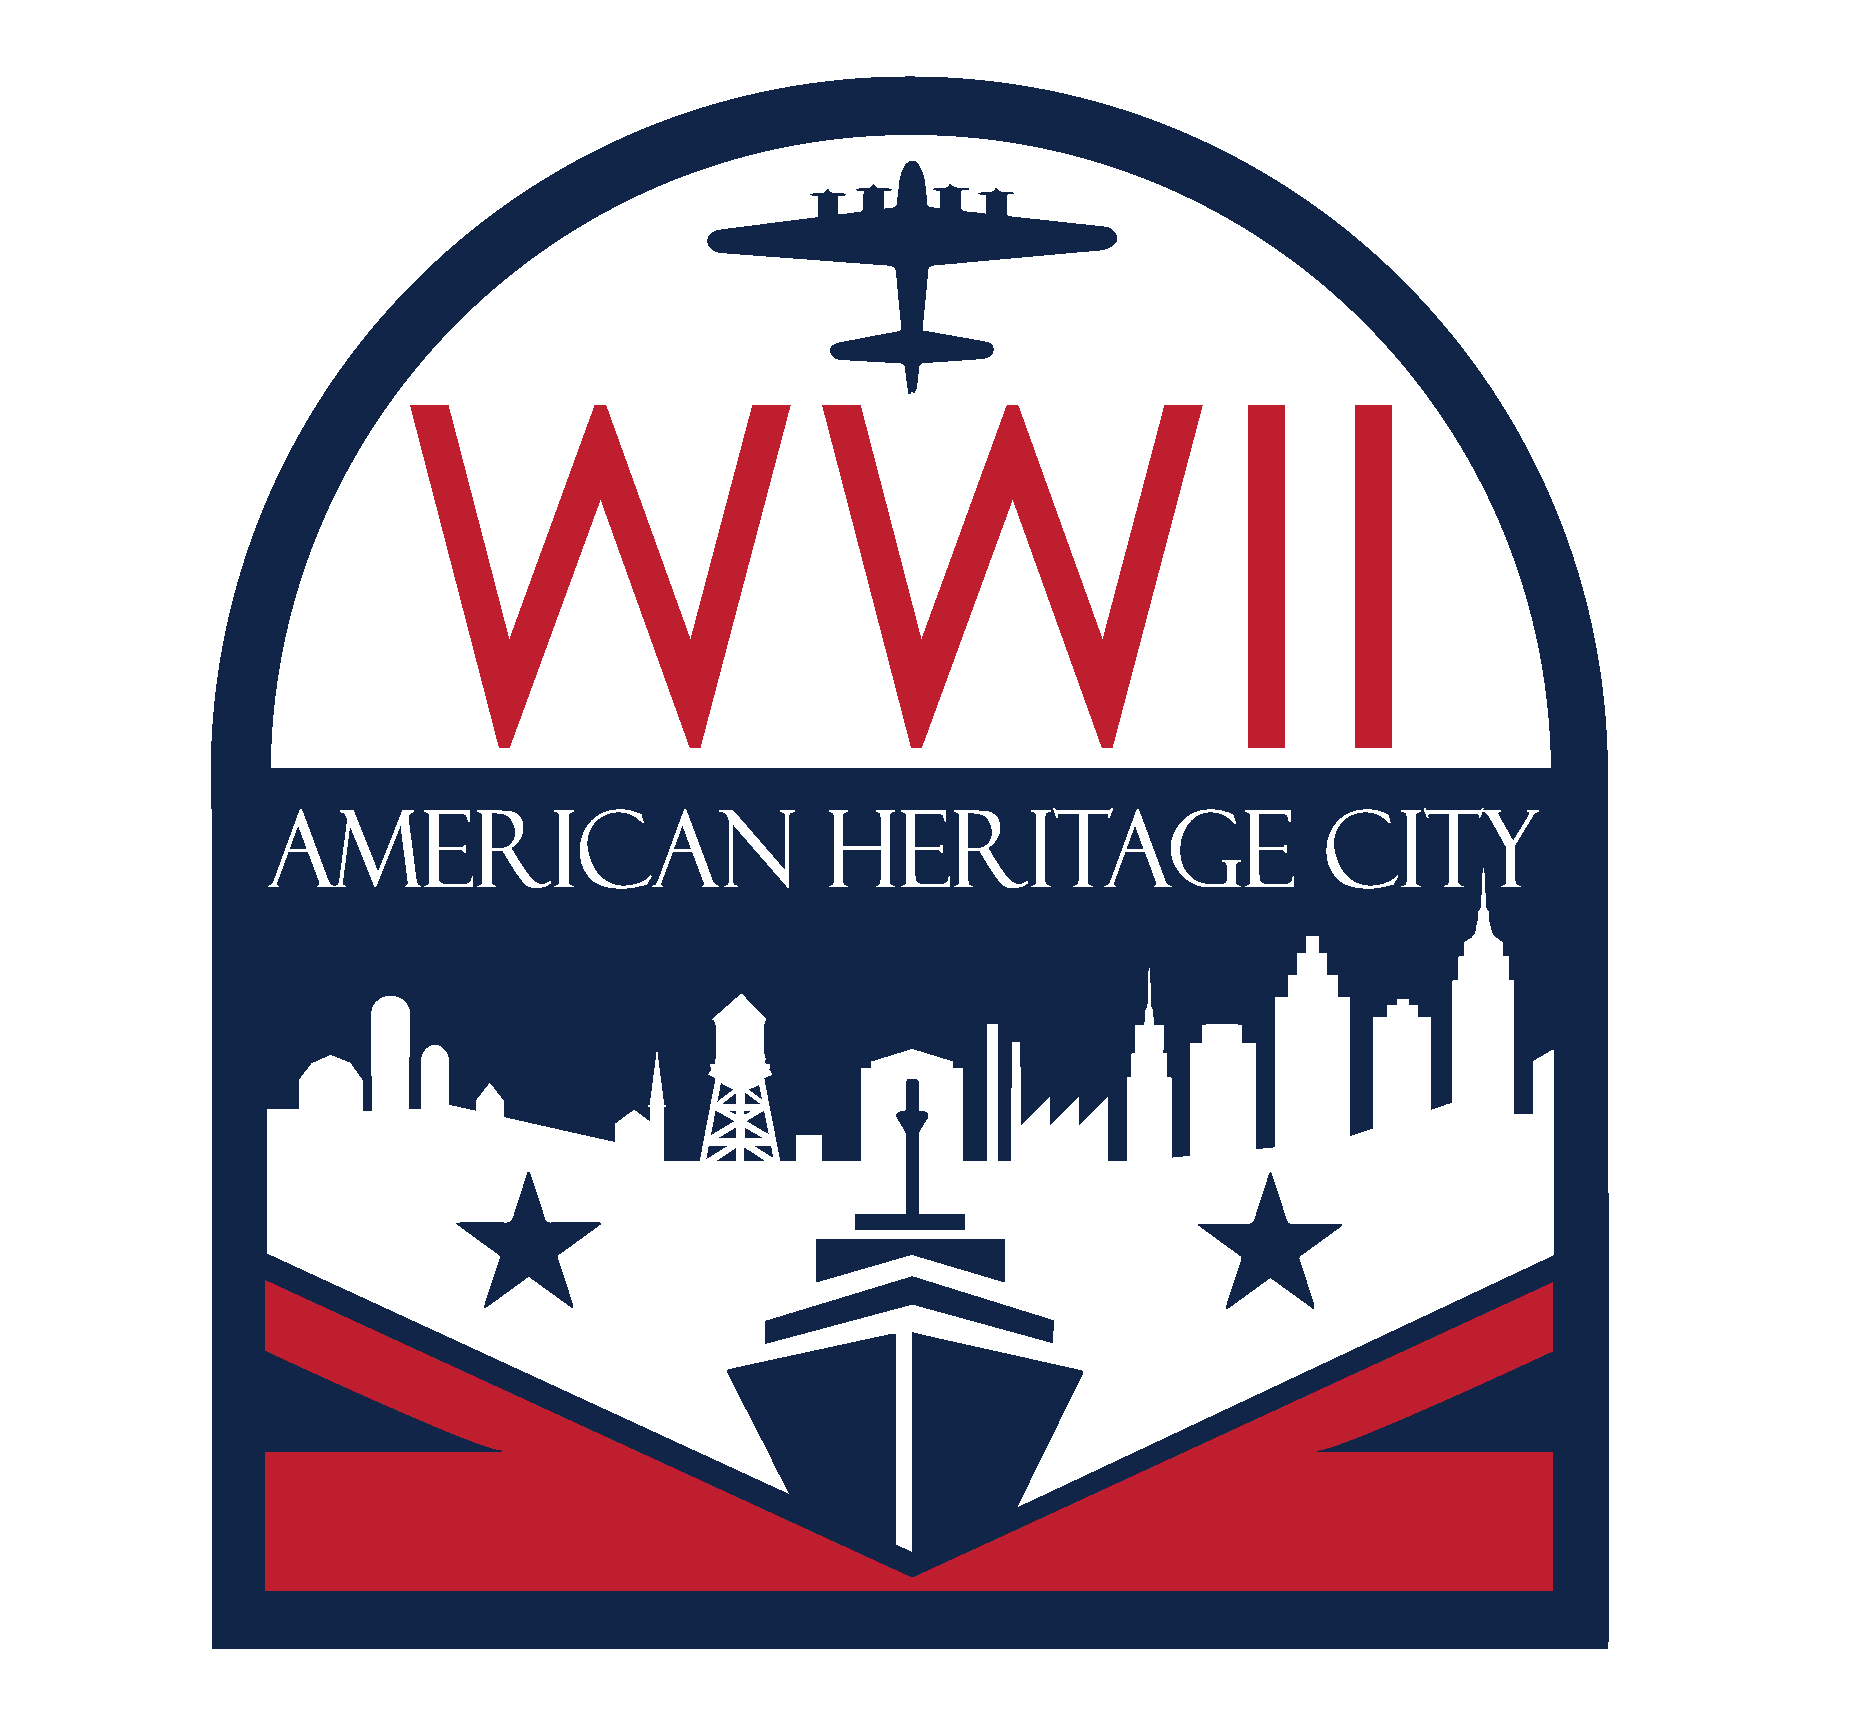 Red, white, & blue logo reading "WWII American Heritage City" showing an outline of farms, factories, & skyscrapers, a ship, & a four-engine bomber aircraft